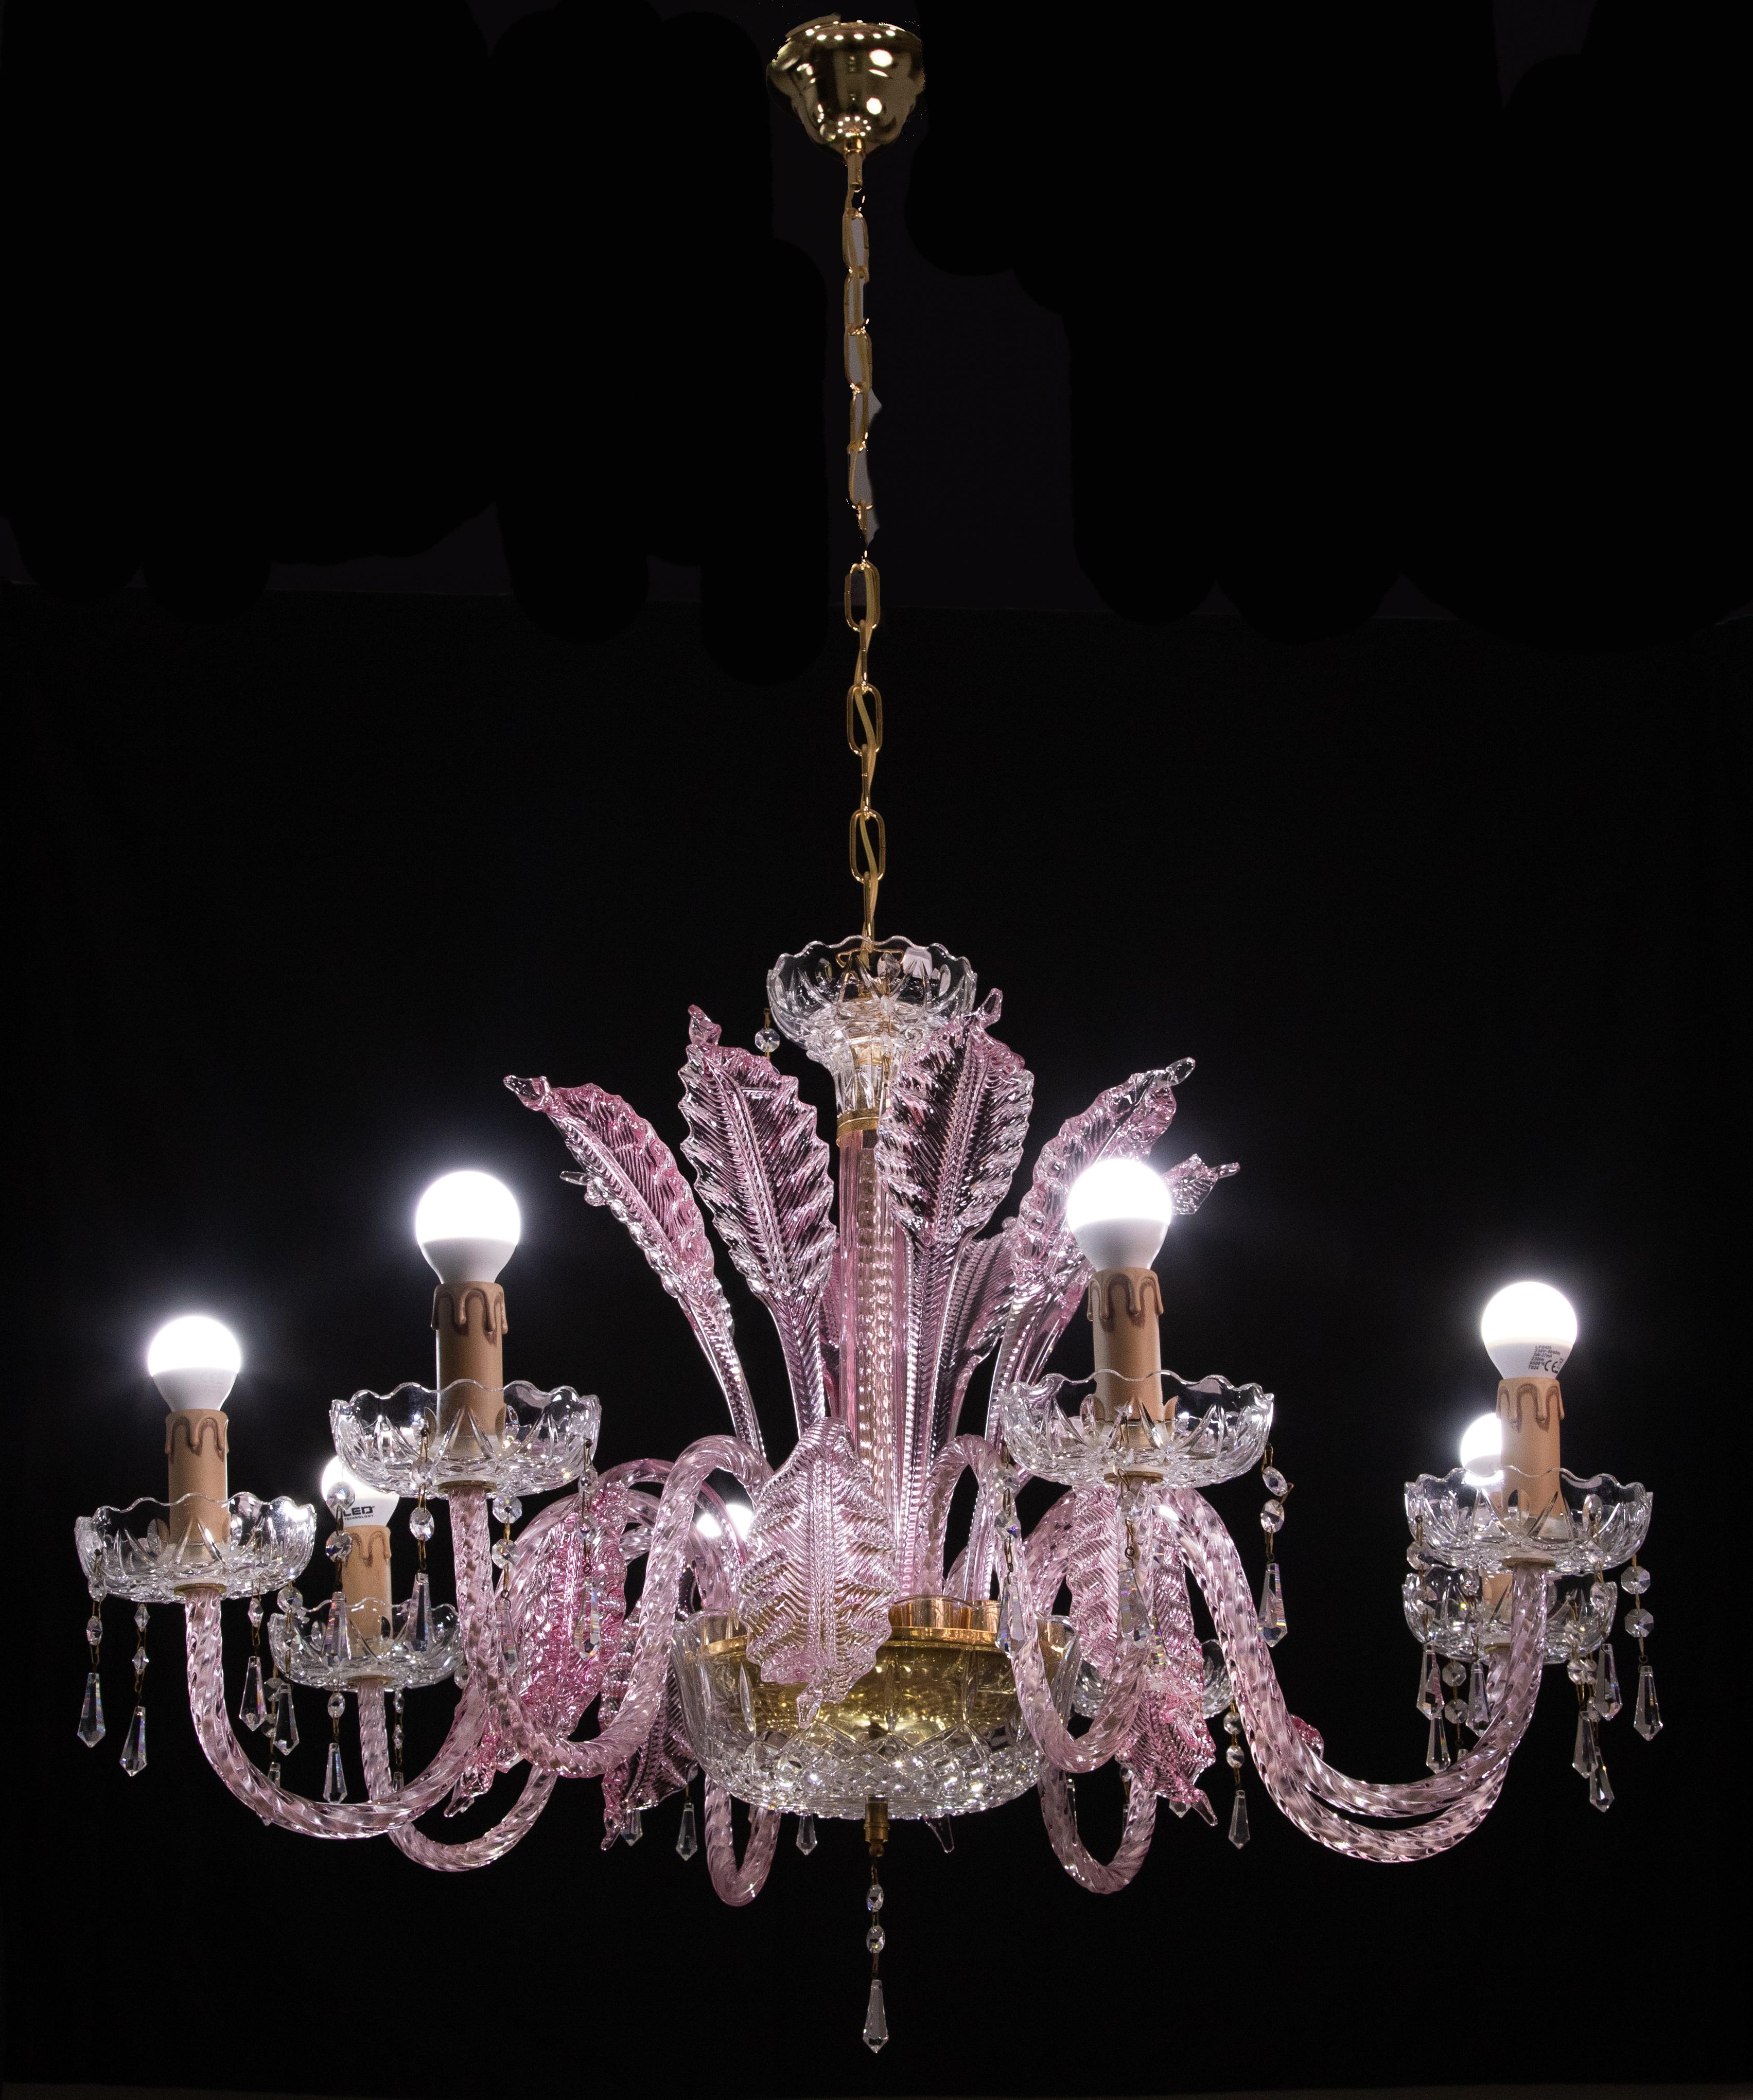 Exceptional 8-light crystal and Murano glass chandelier in pink color.

The light in perfect condition mounts 8 lights e27, the entire electrical system has been redone new.

All glass is perfectly intact, the chain and rosette have been